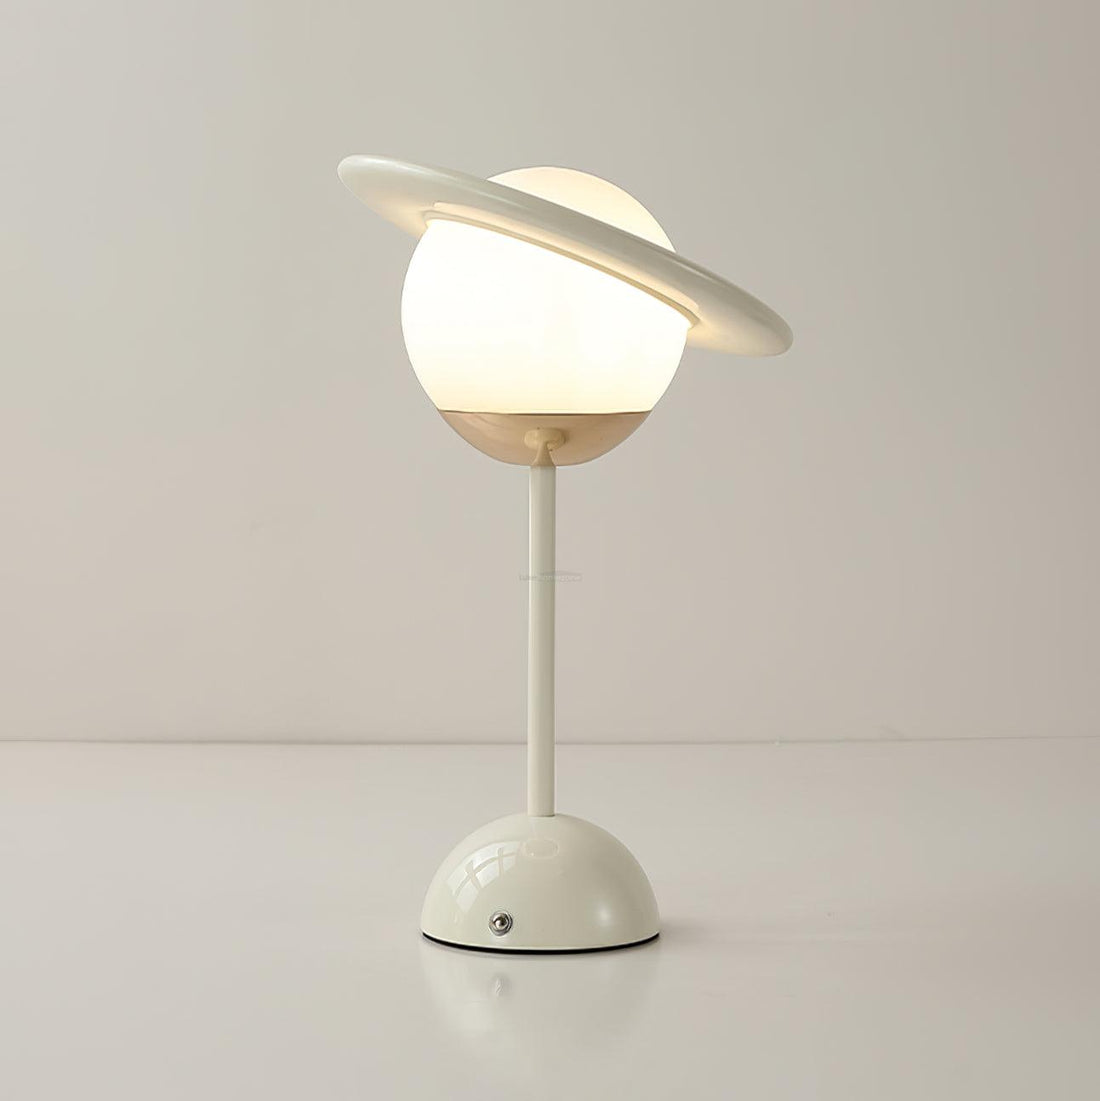 Saturn Planet Built-in Battery Table Lamp  ∅ 7.8″